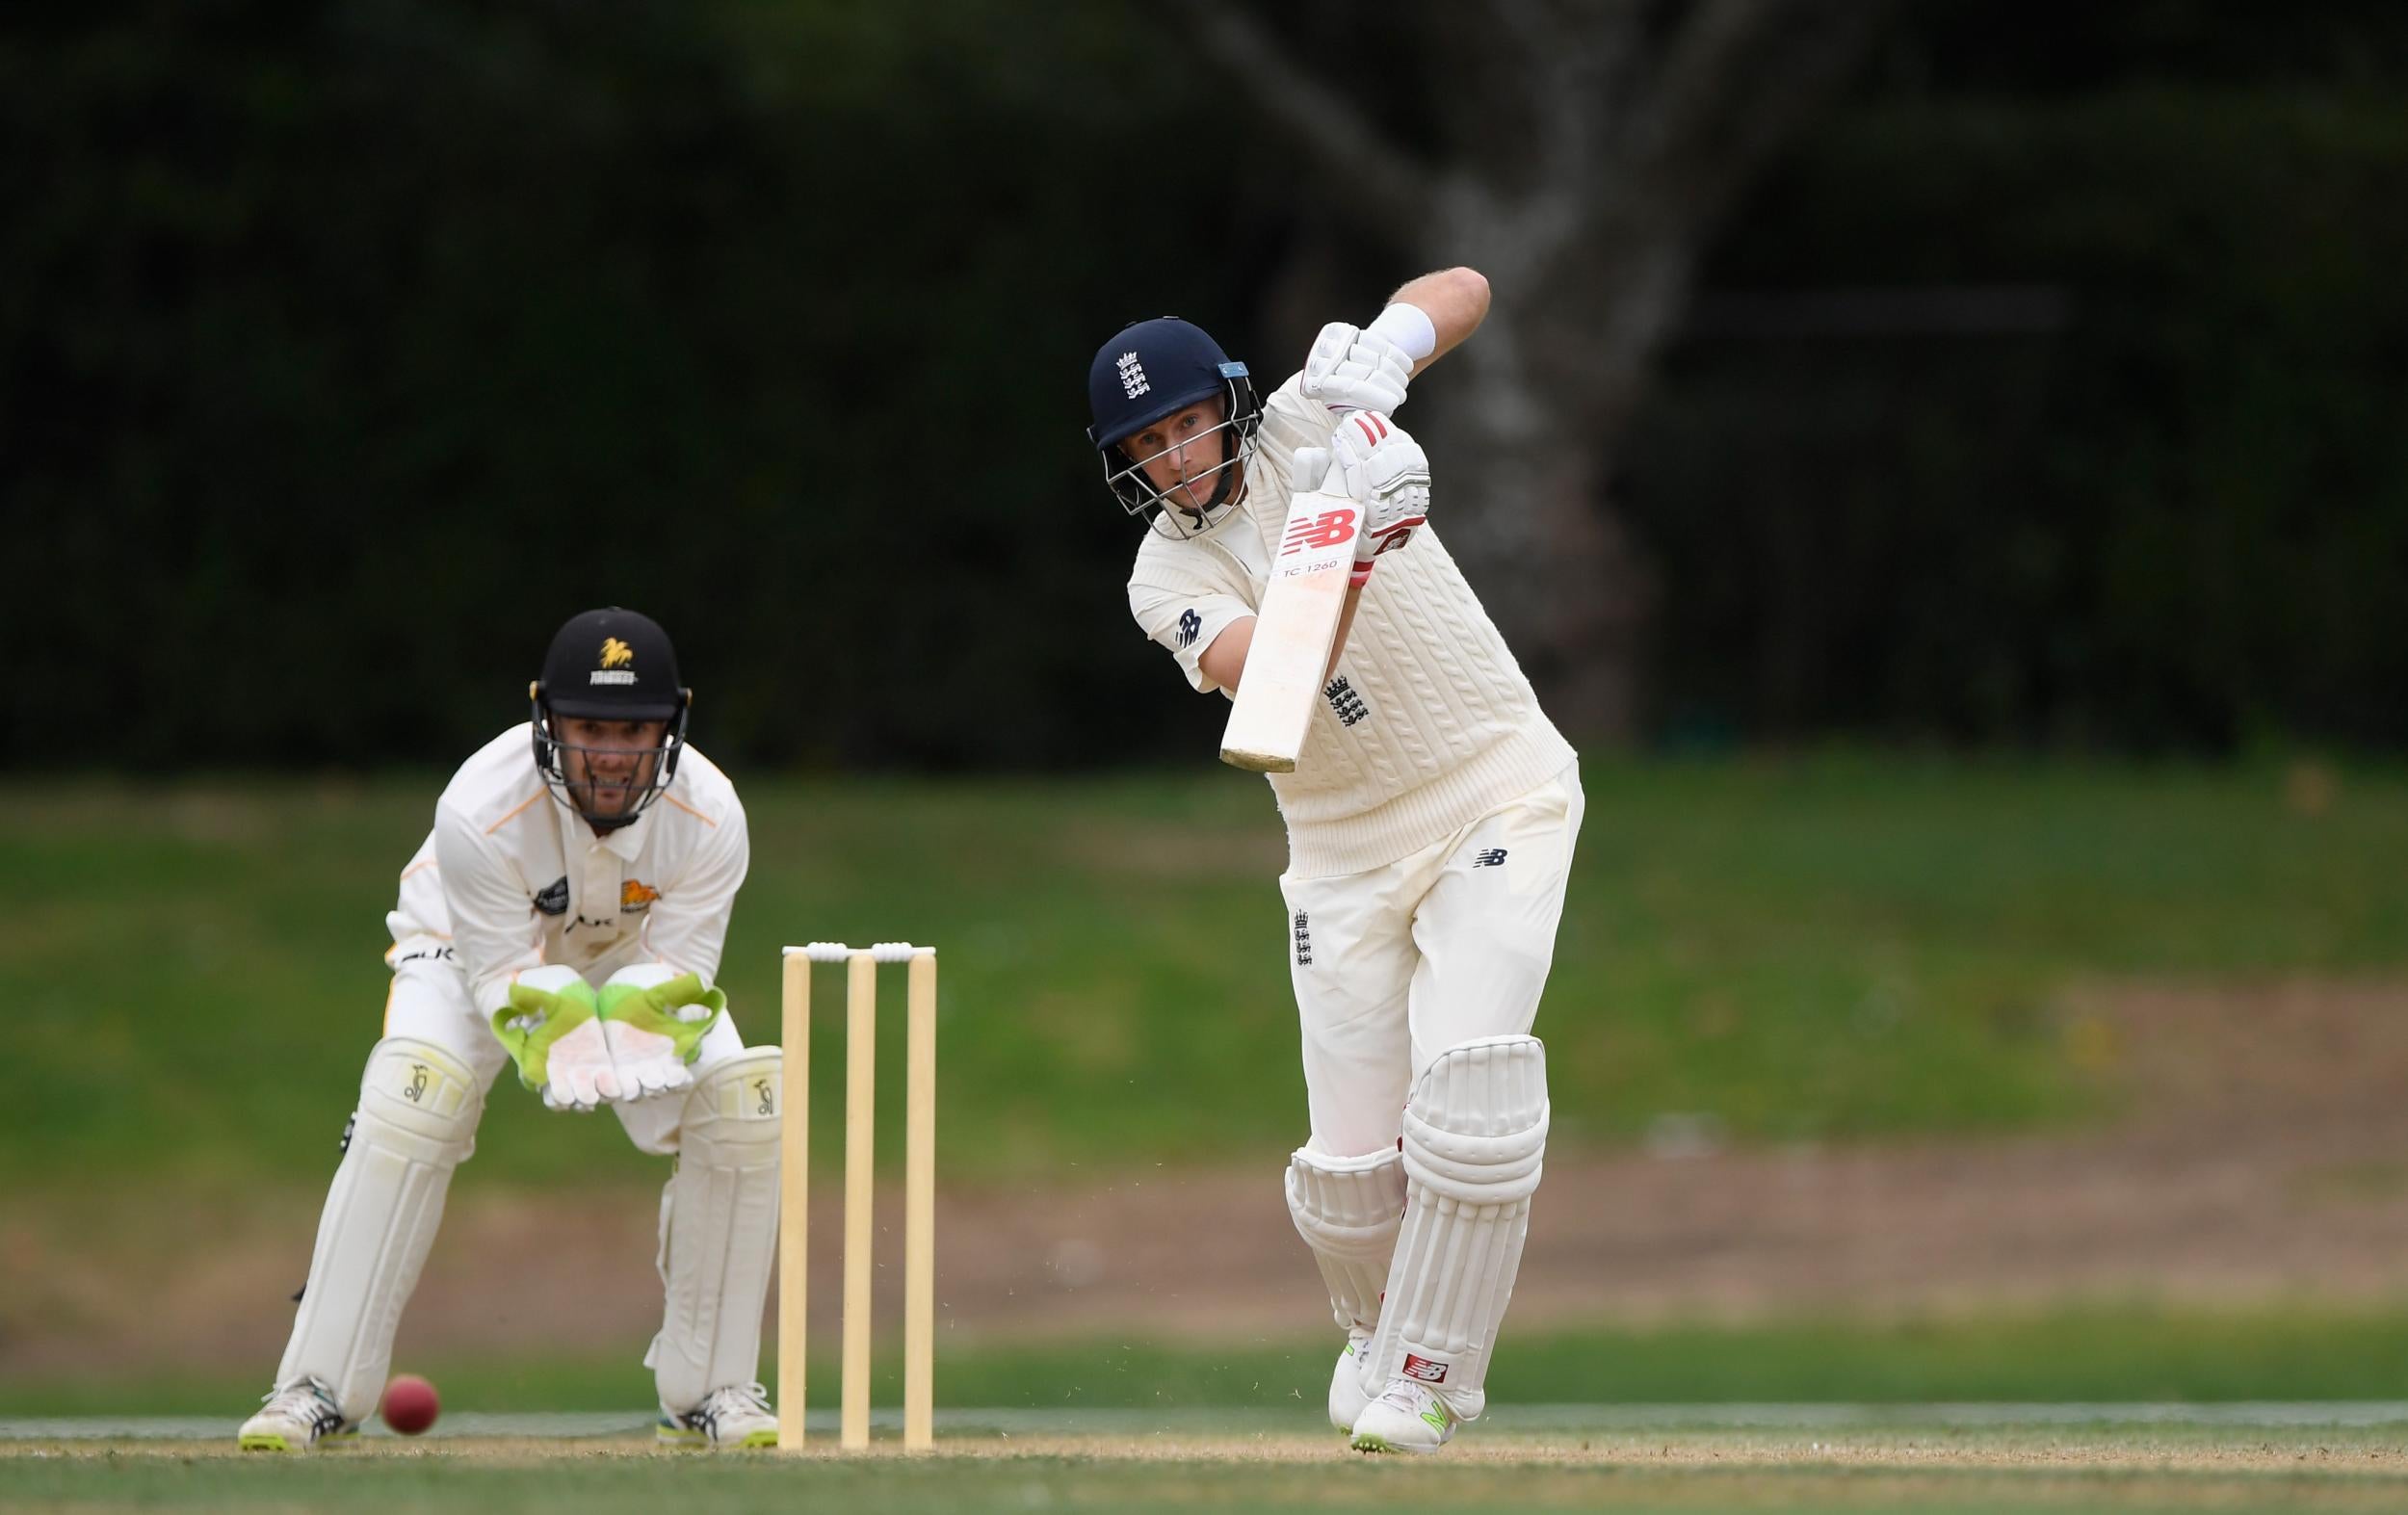 Joe Root hit 115 on the final day of the second tour match against a New Zealand XI at Seddon Park